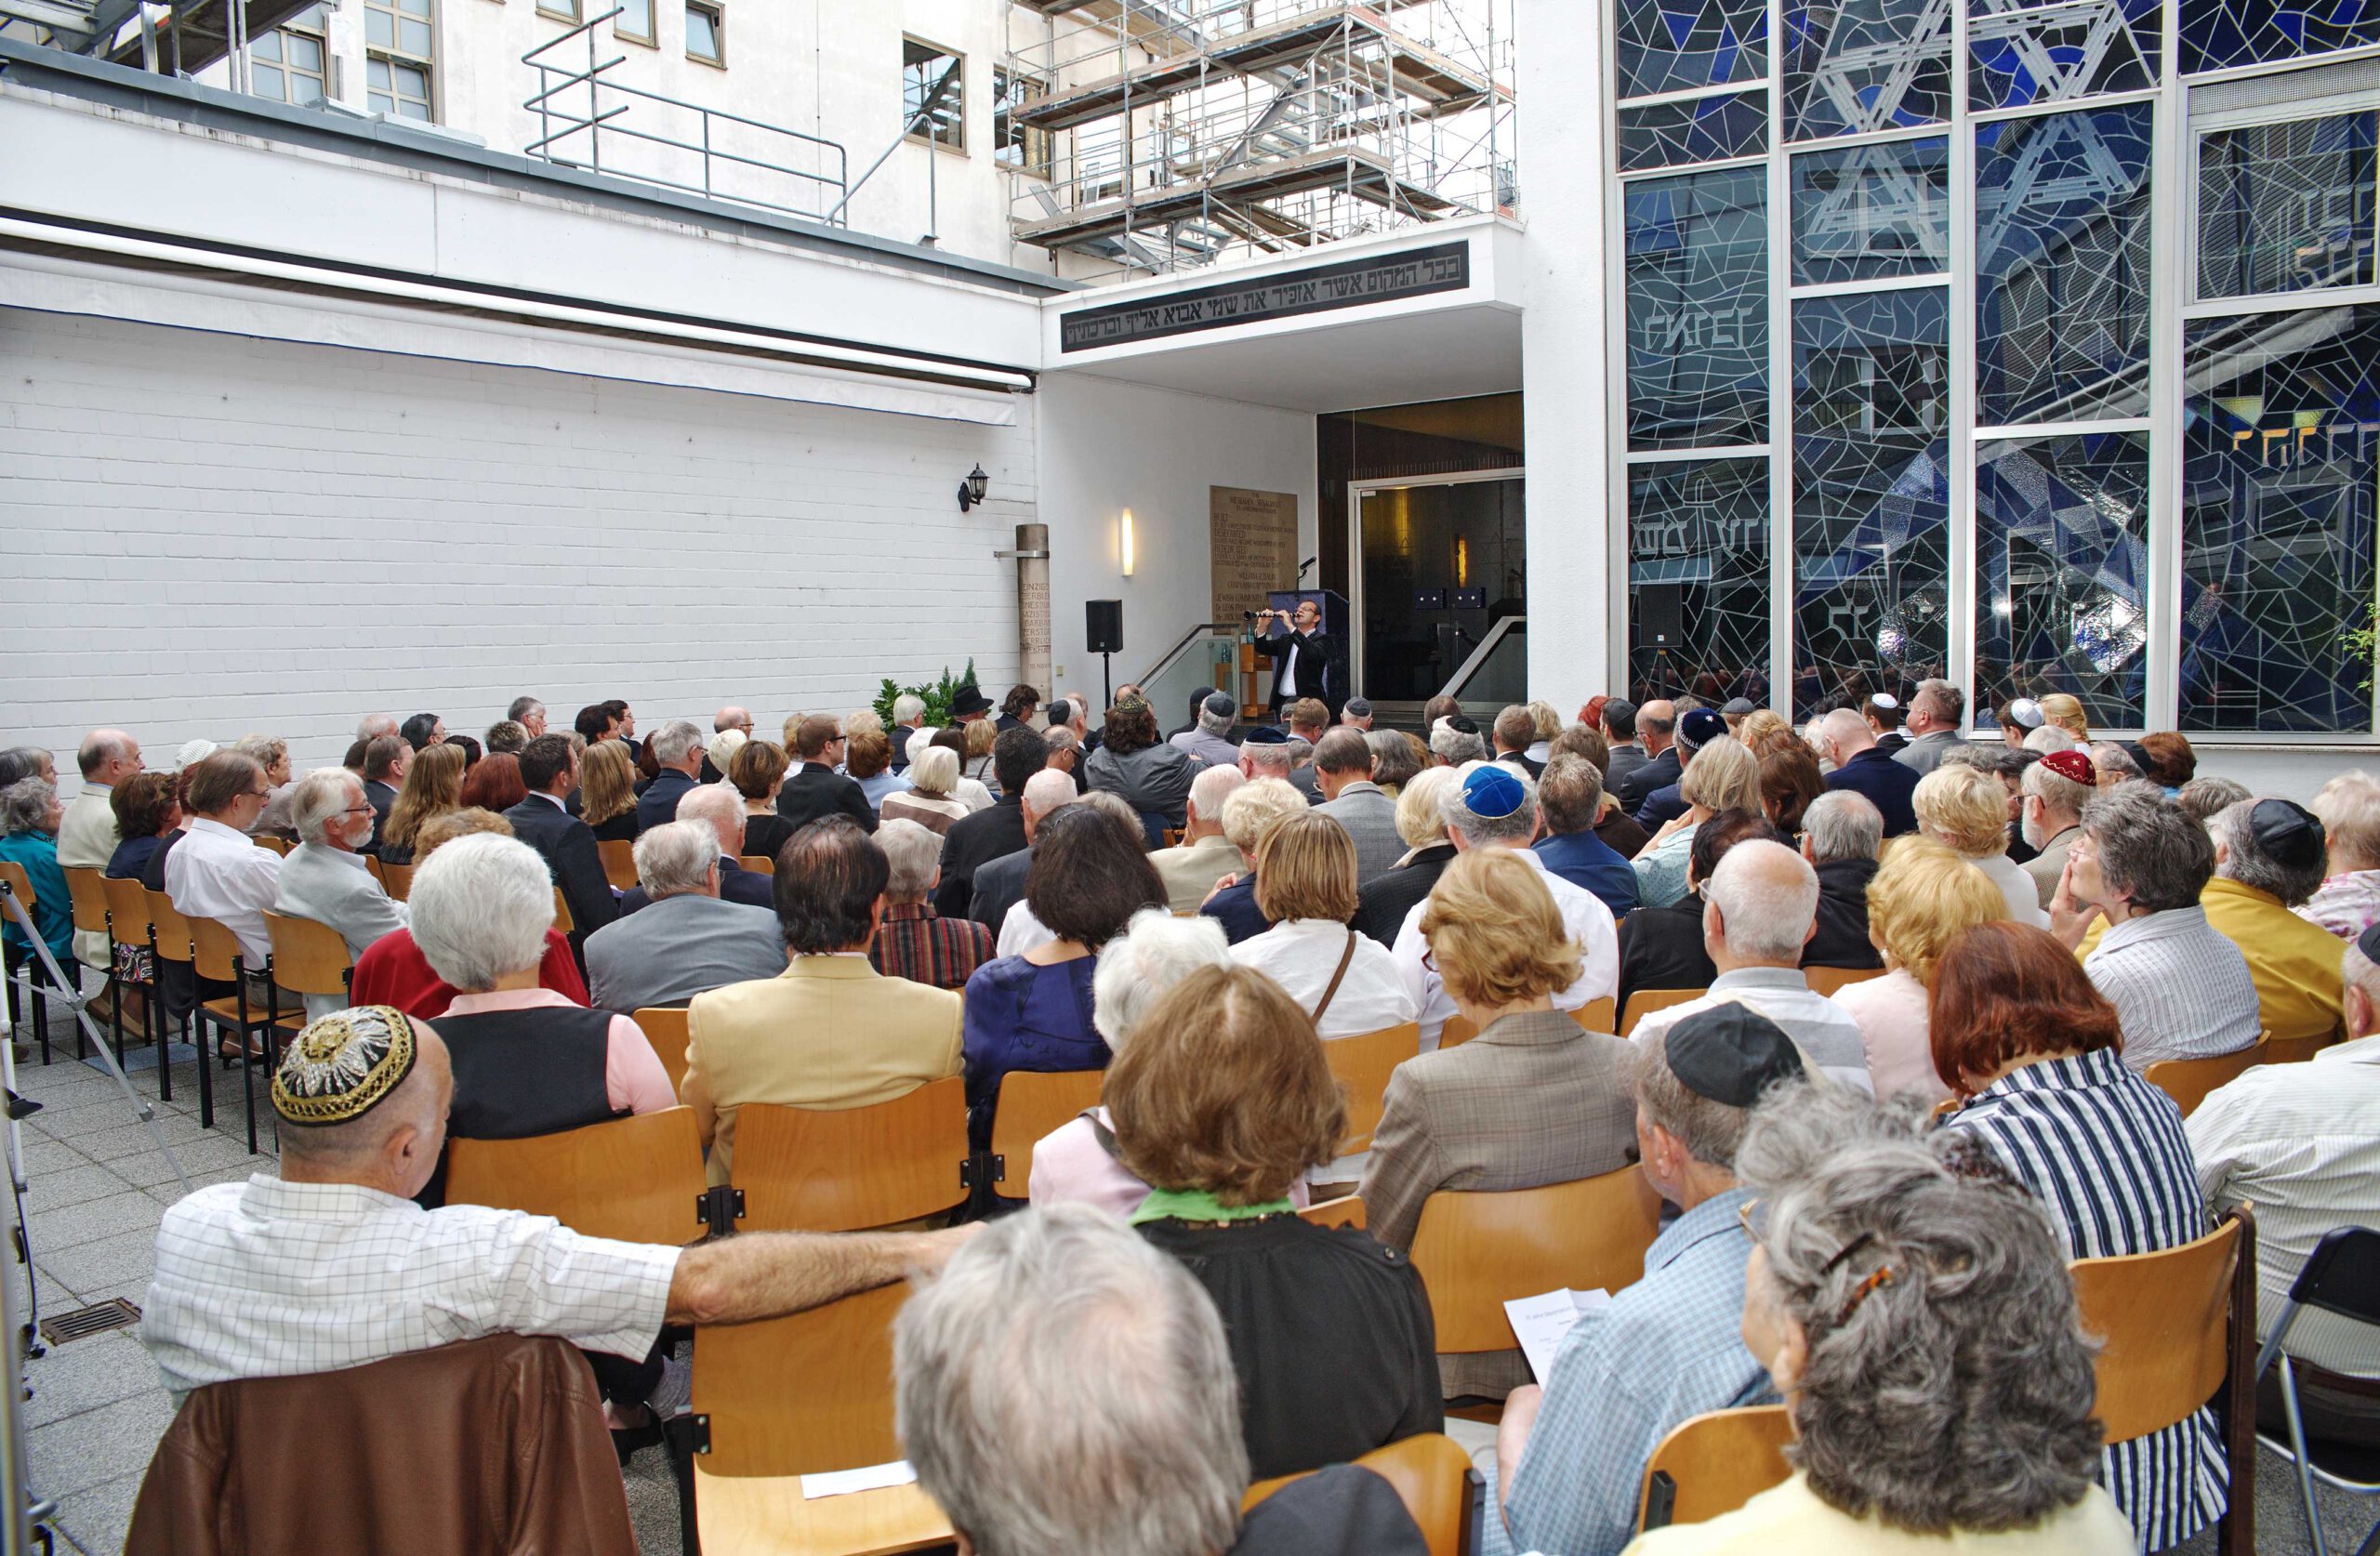 Commemoration ceremony in the courtyard of the Wiesbaden Jewish Community on the 70th anniversary of the last major deportation in 1942. Photographer: Igor Eisenschtat. Jewish Community Collection